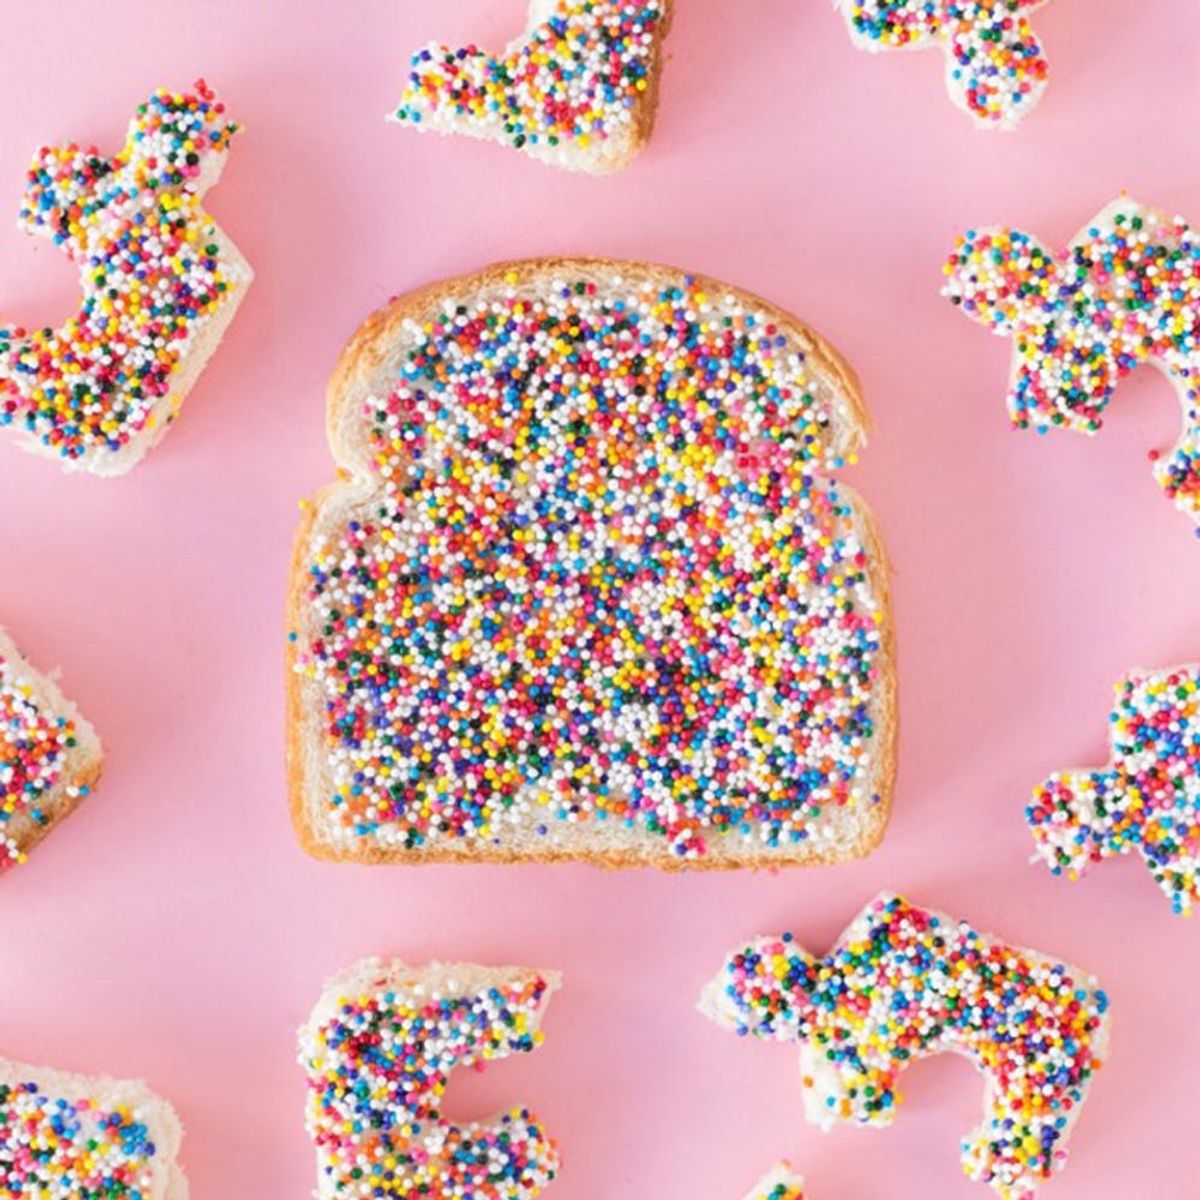 16 Reasons You NEED More Fairy Bread in Your Life